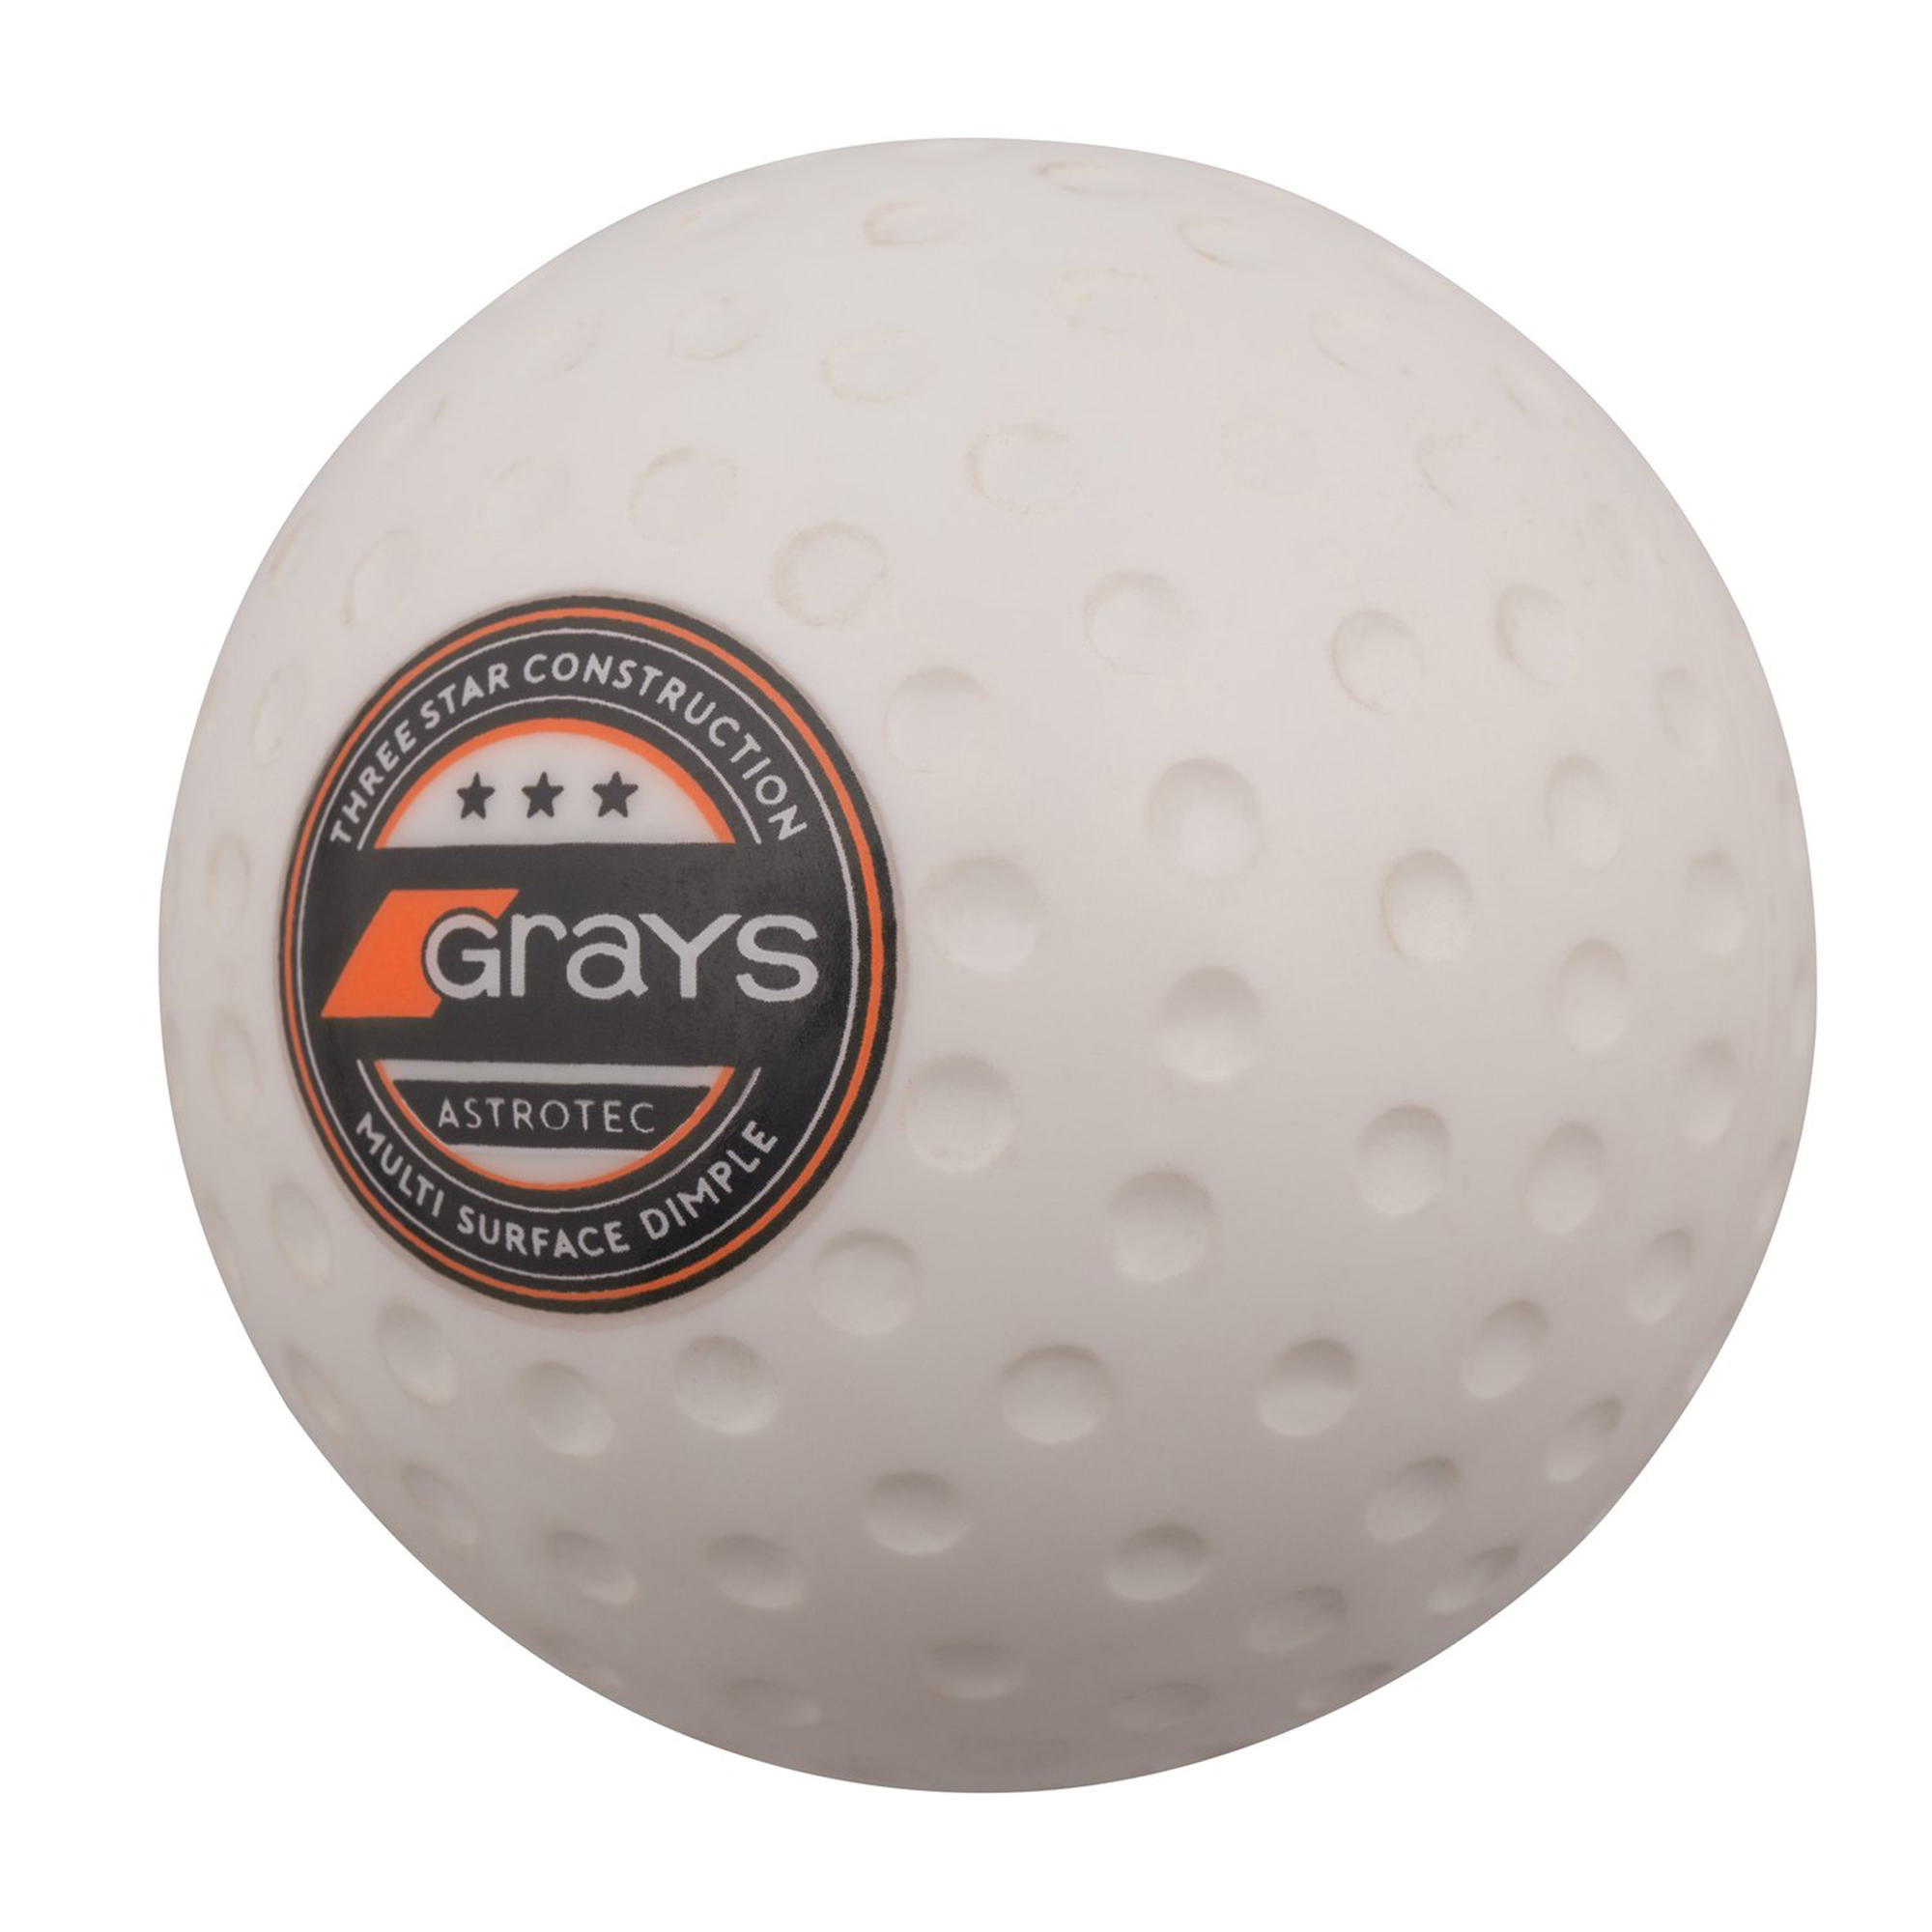 GRAYS Dimpled Field Hockey Ball Astrotec - White